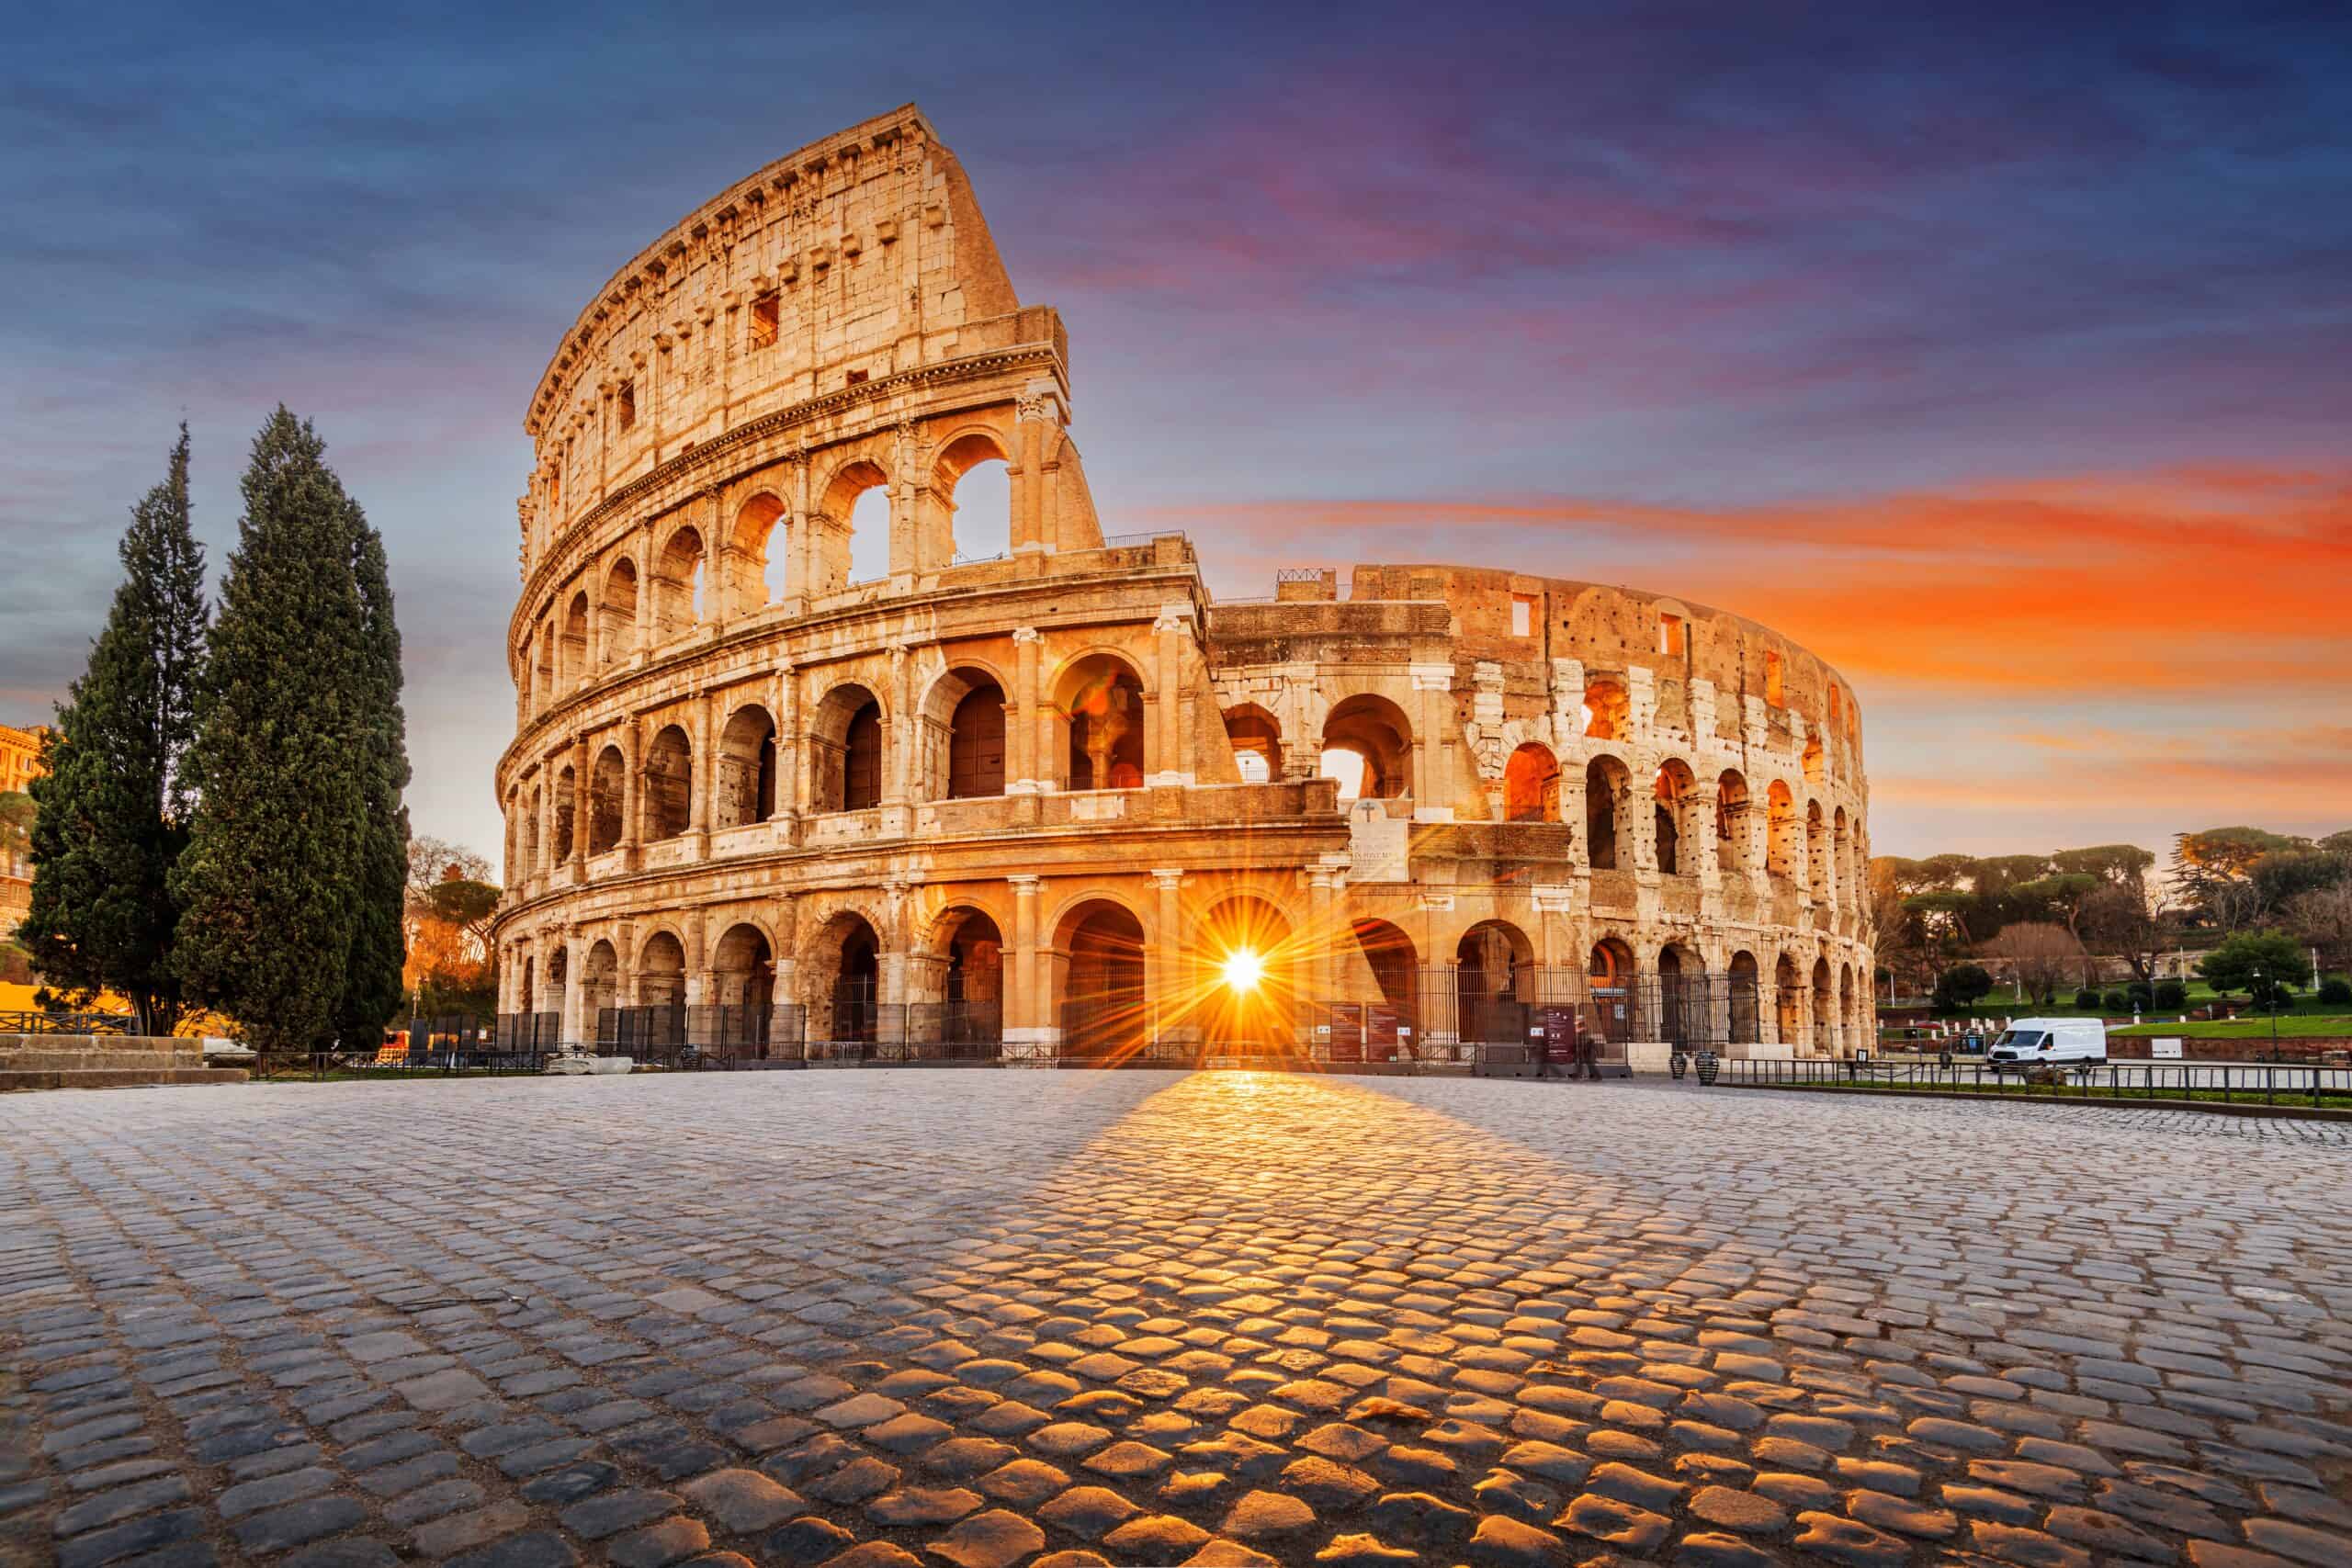 Colosseum, Italy